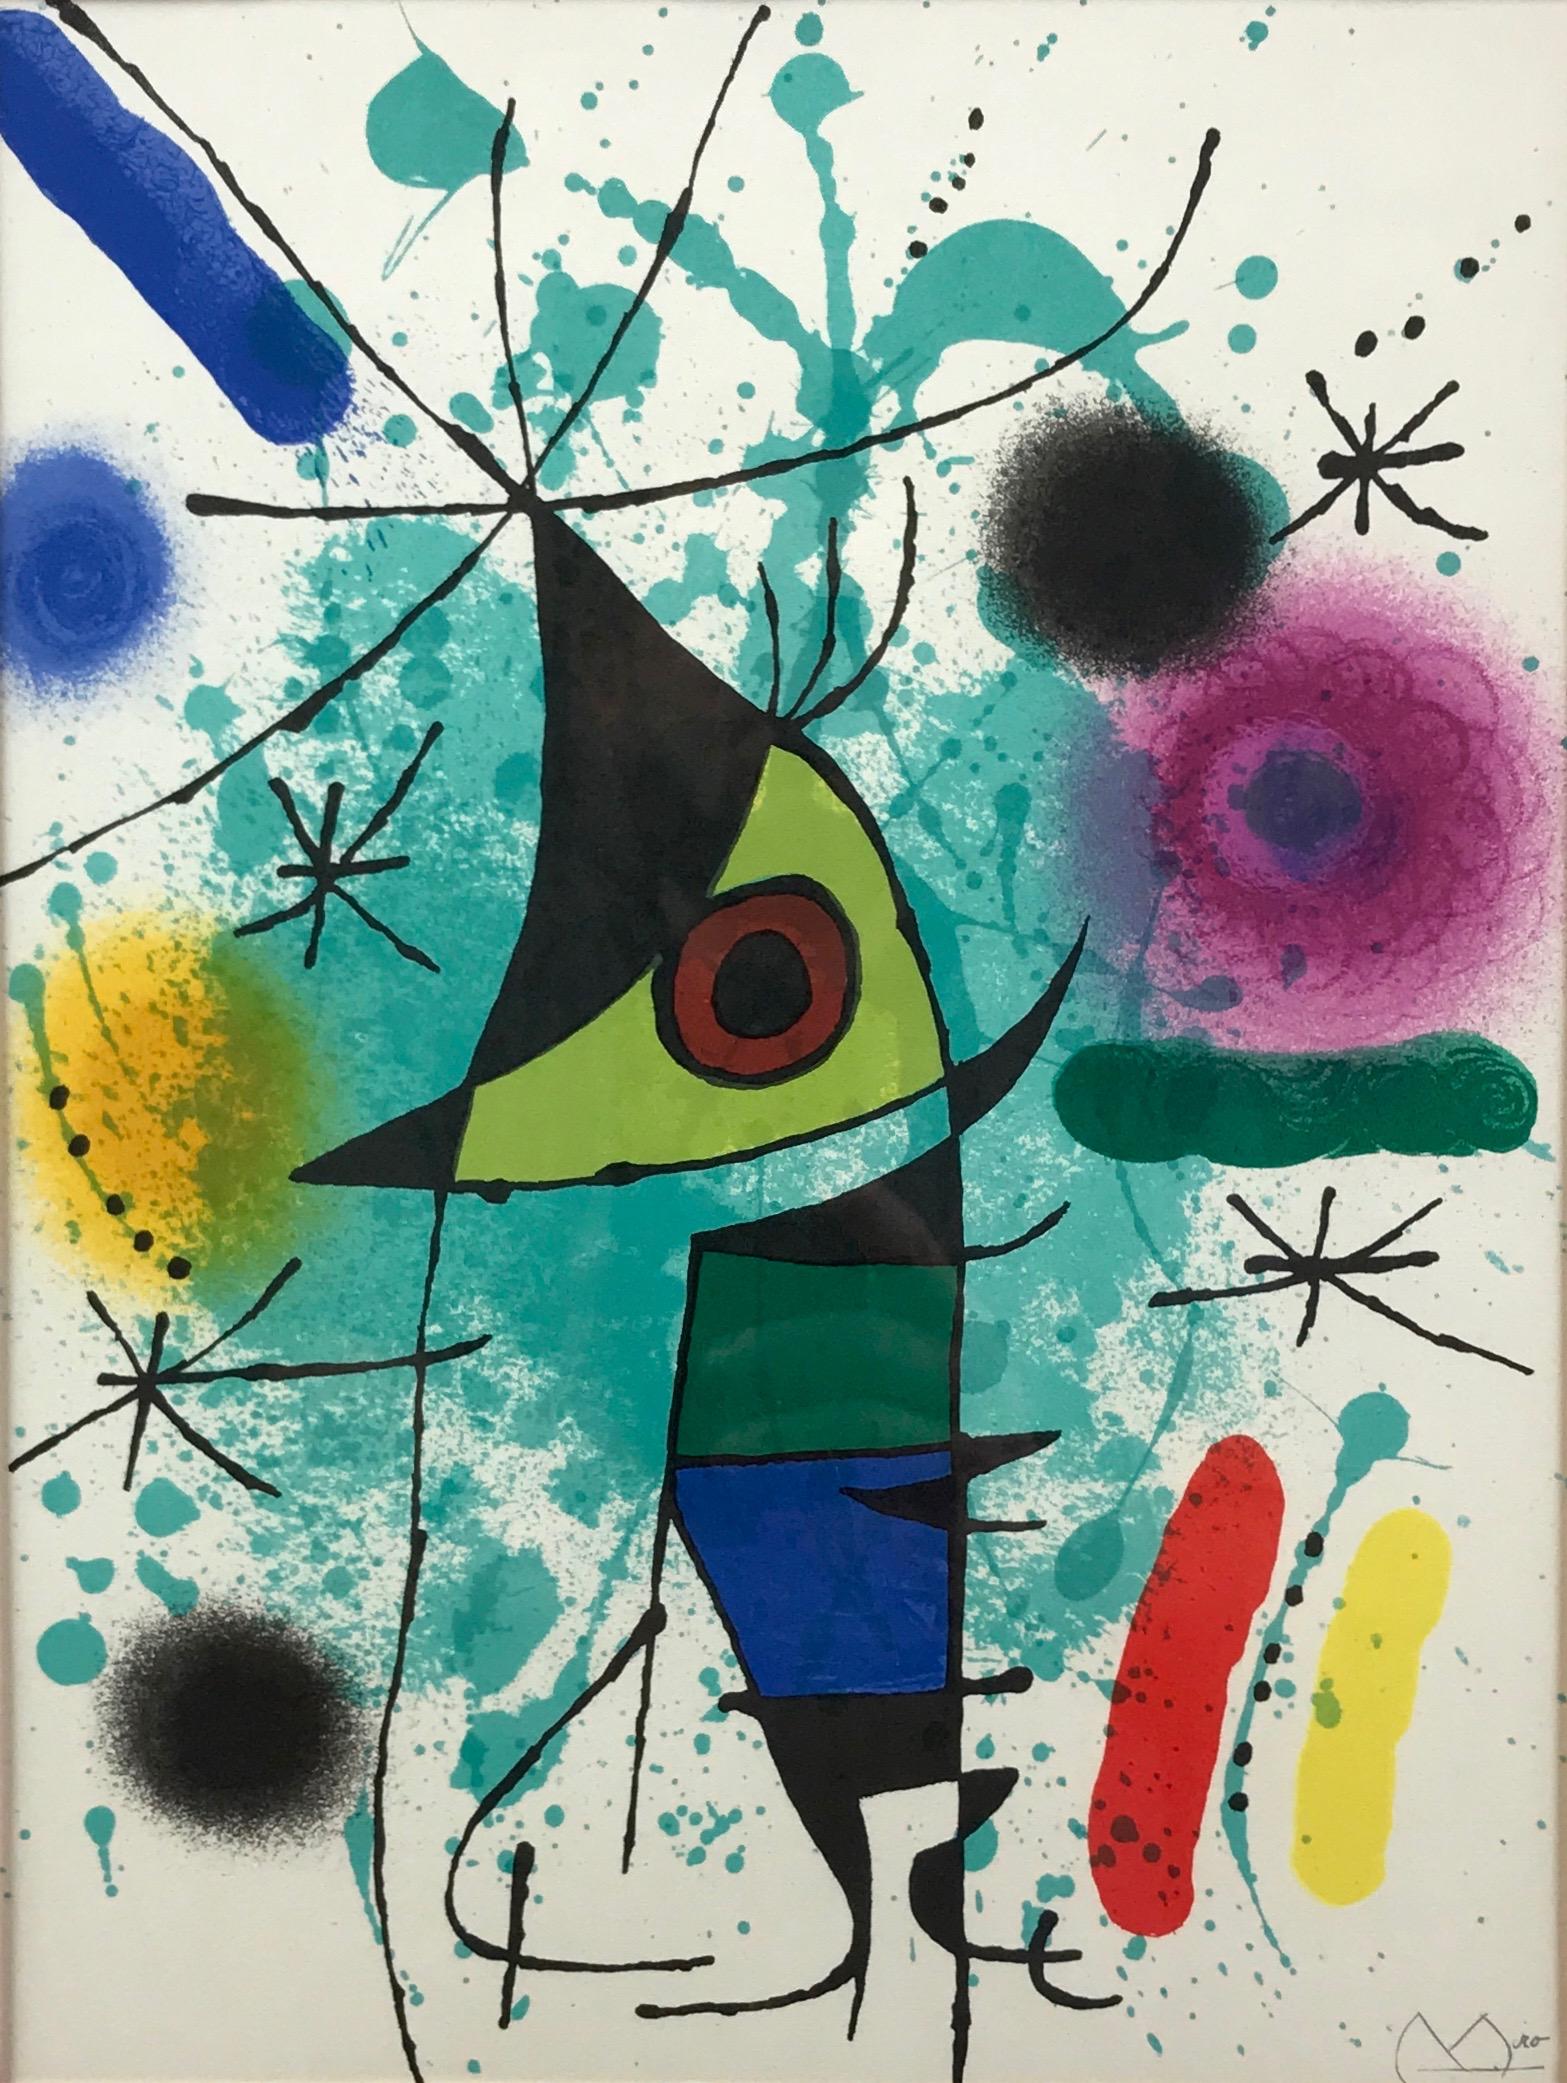 A framed 1972 “Le Chanteur, ou Le Poisson Chantant” (“The Singer, or The Singing Fish”) limited edition certified original lithograph by Joan Miró (1893–1983), signed in the stone.

An especially exuberant and vibrant example of the singular